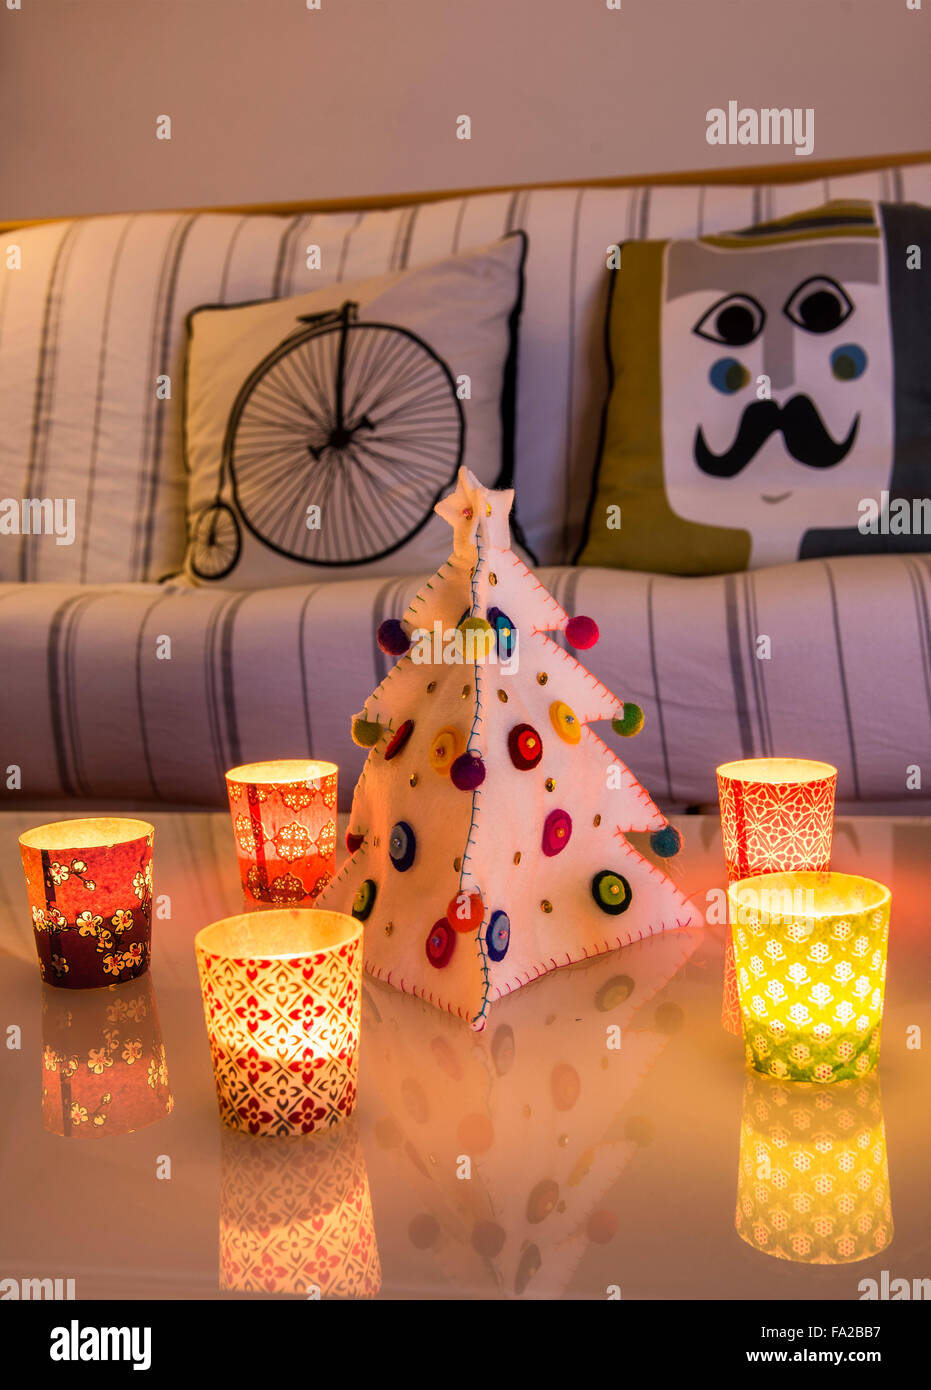 Italy, Chtistmas Atmosphere in stylish home. Small candles on the table and a Christmas tree made of cloth. Stock Photo